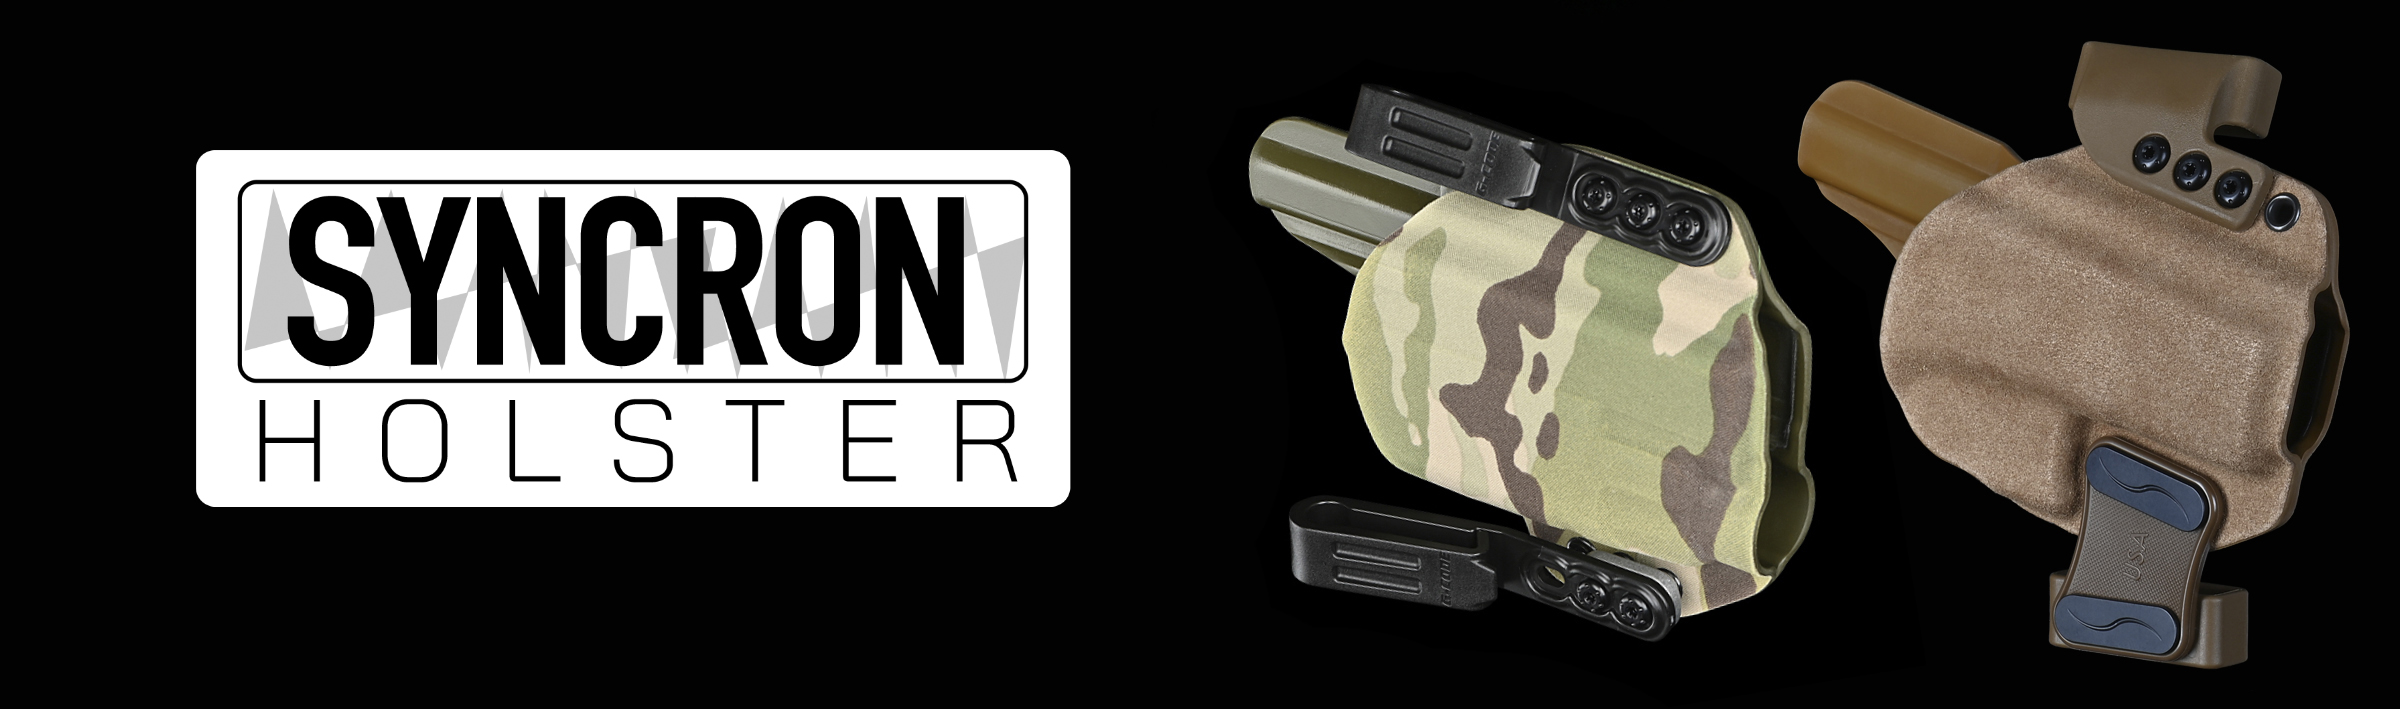 Syncron Holster - tactical holsters and equipment